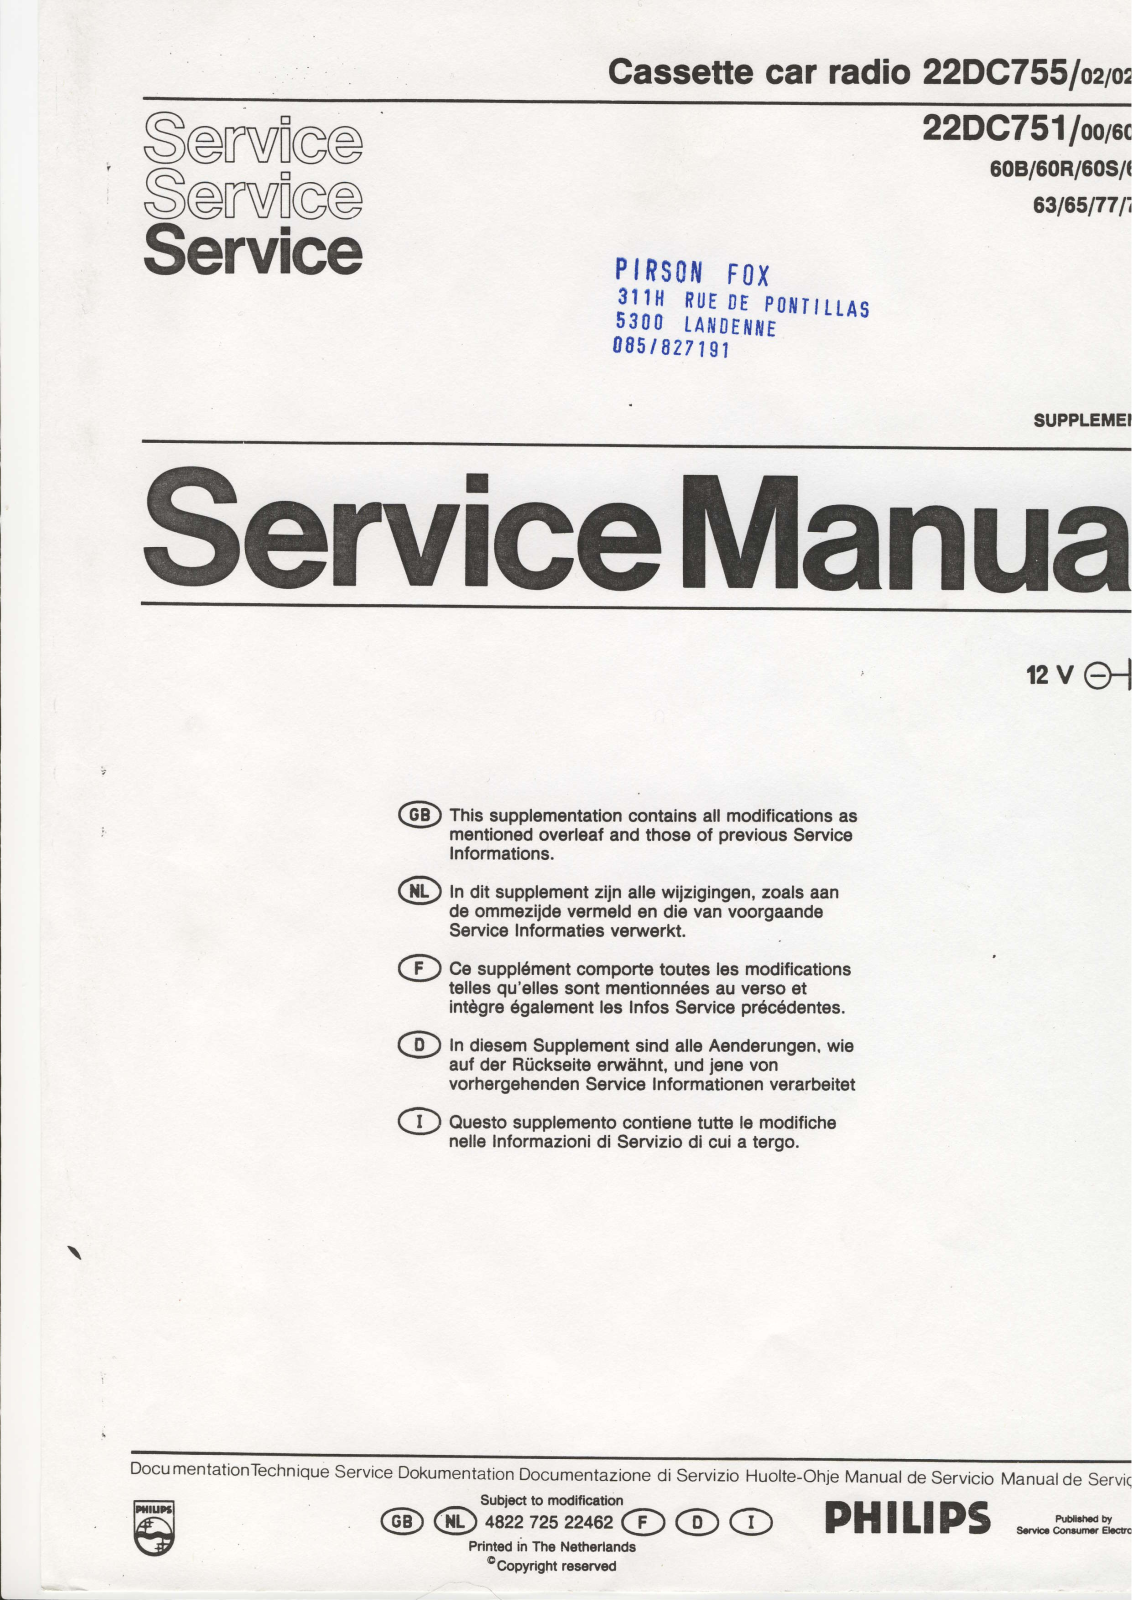 Philips DC-751, DC-755 Service manual